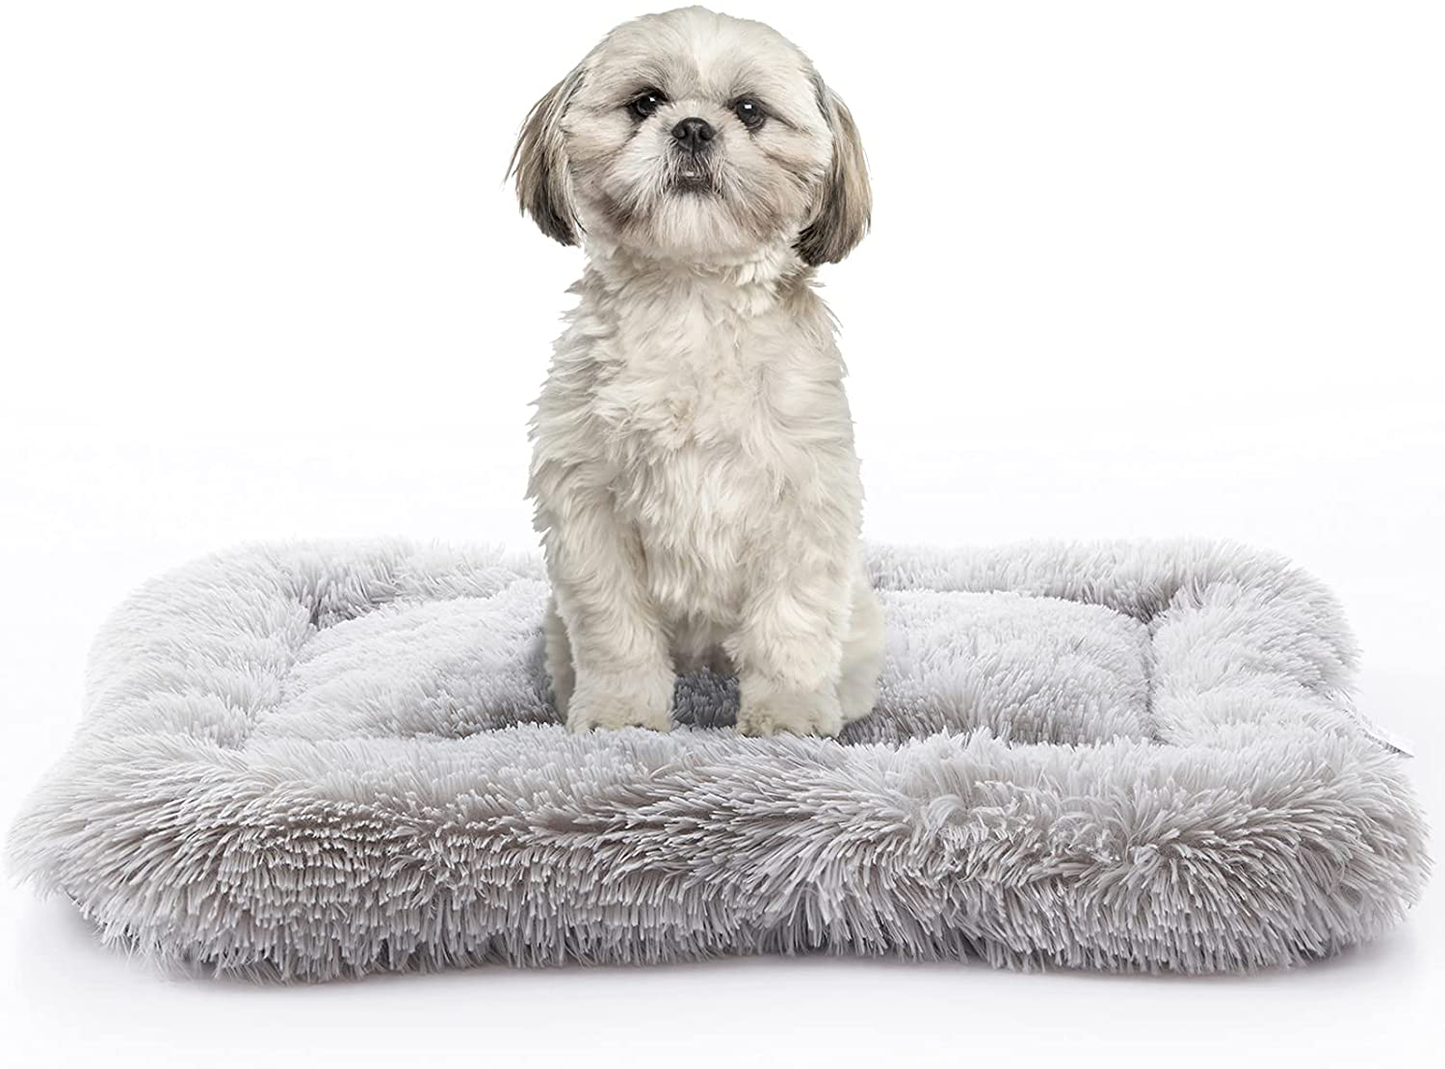 METCHIC Dog Crate Beds Small Dogs, Calming Dog Beds Crate Pads, Dog Crate Mats Machine Washable